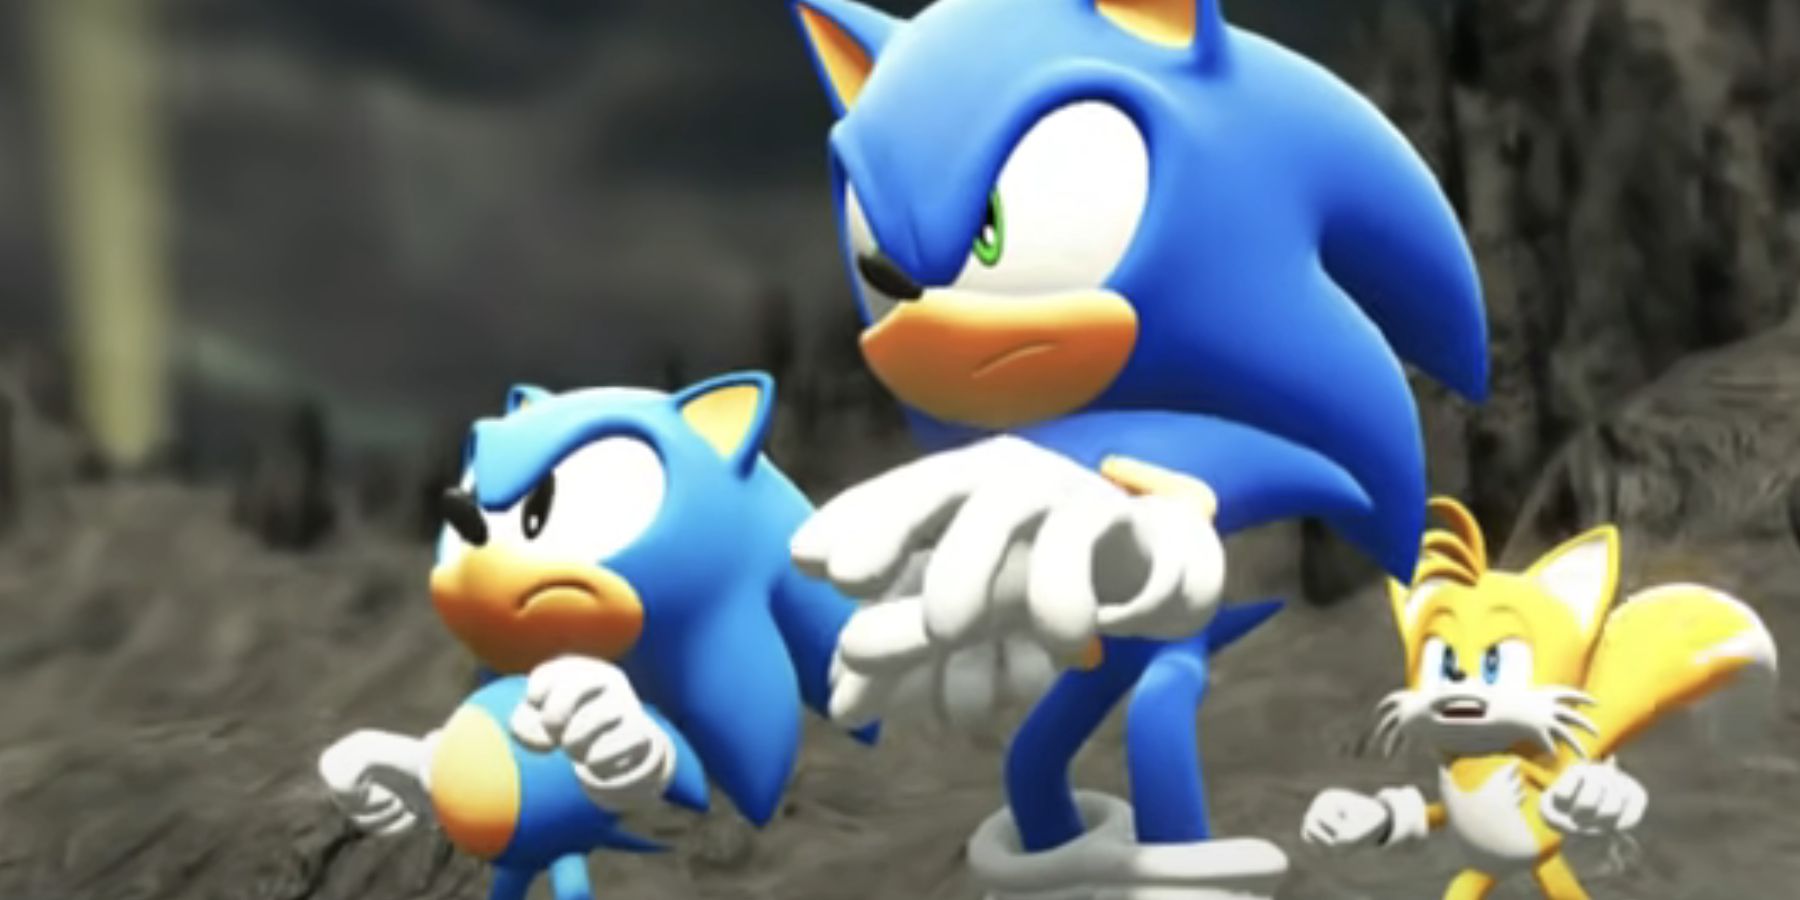 Classic Sonic The Hedgehog in 2023  Sonic, Classic sonic, Sonic the  hedgehog